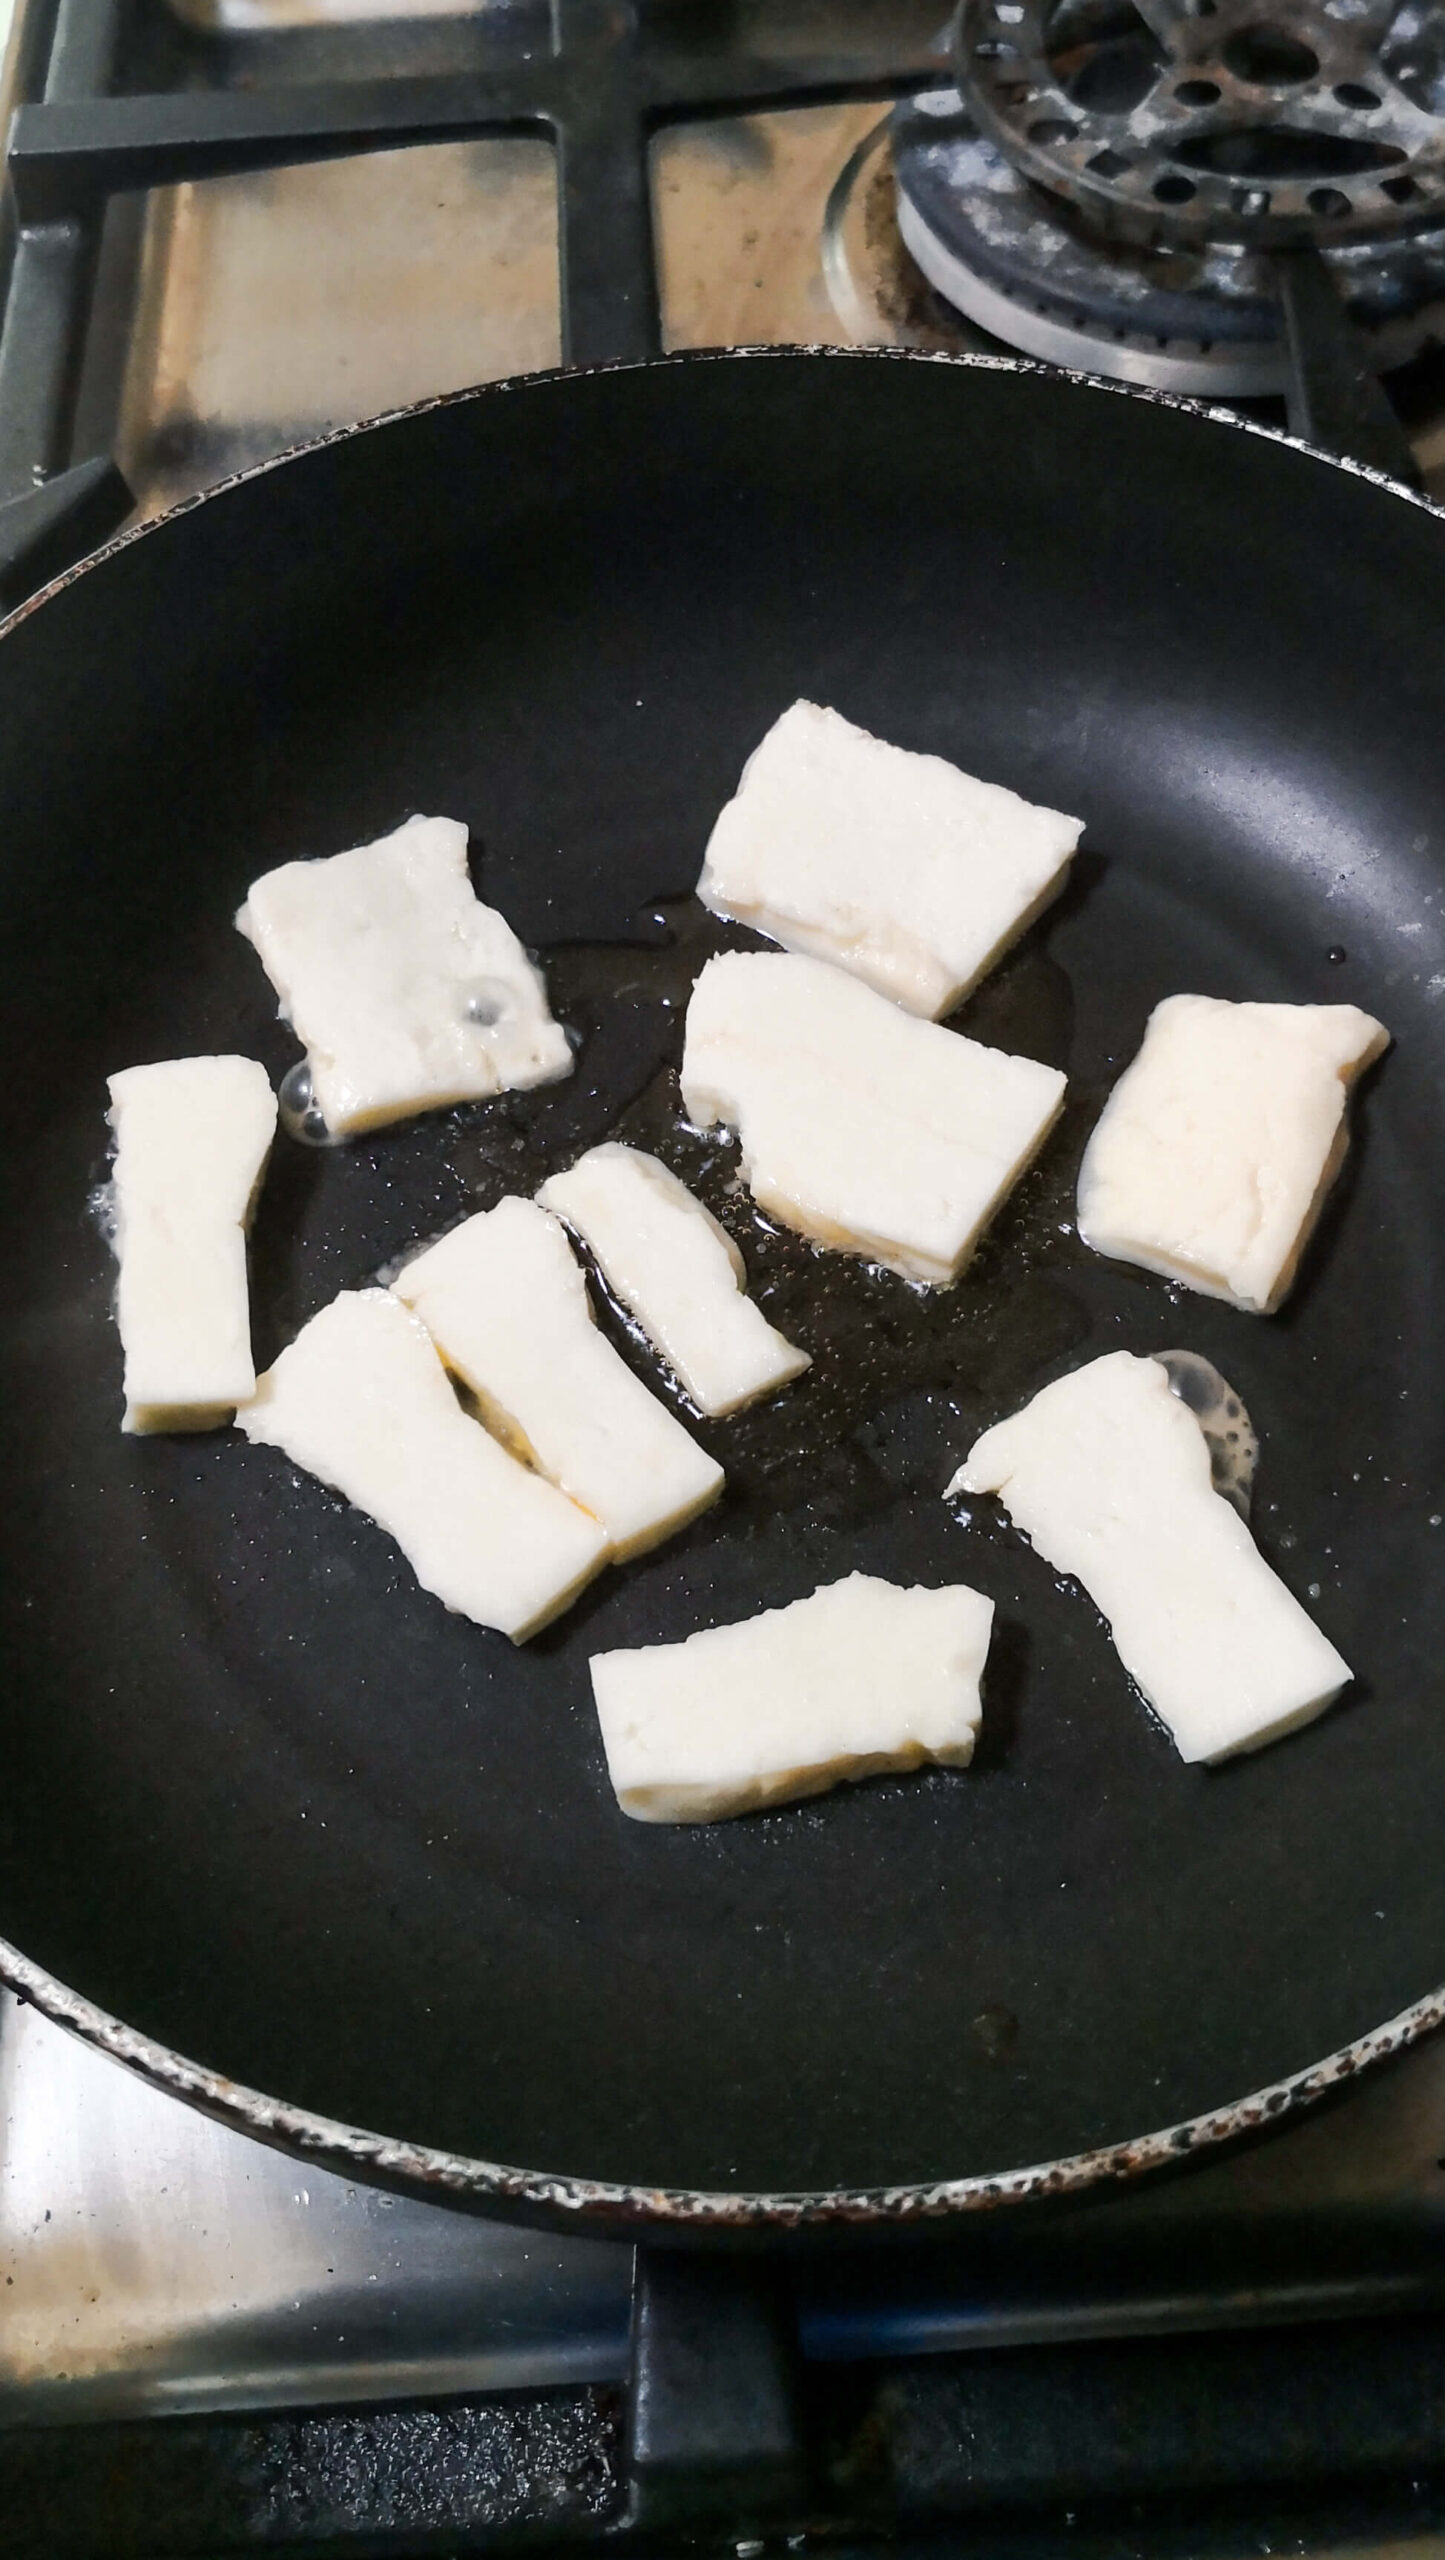 Cooking halloumi in a small black pan.